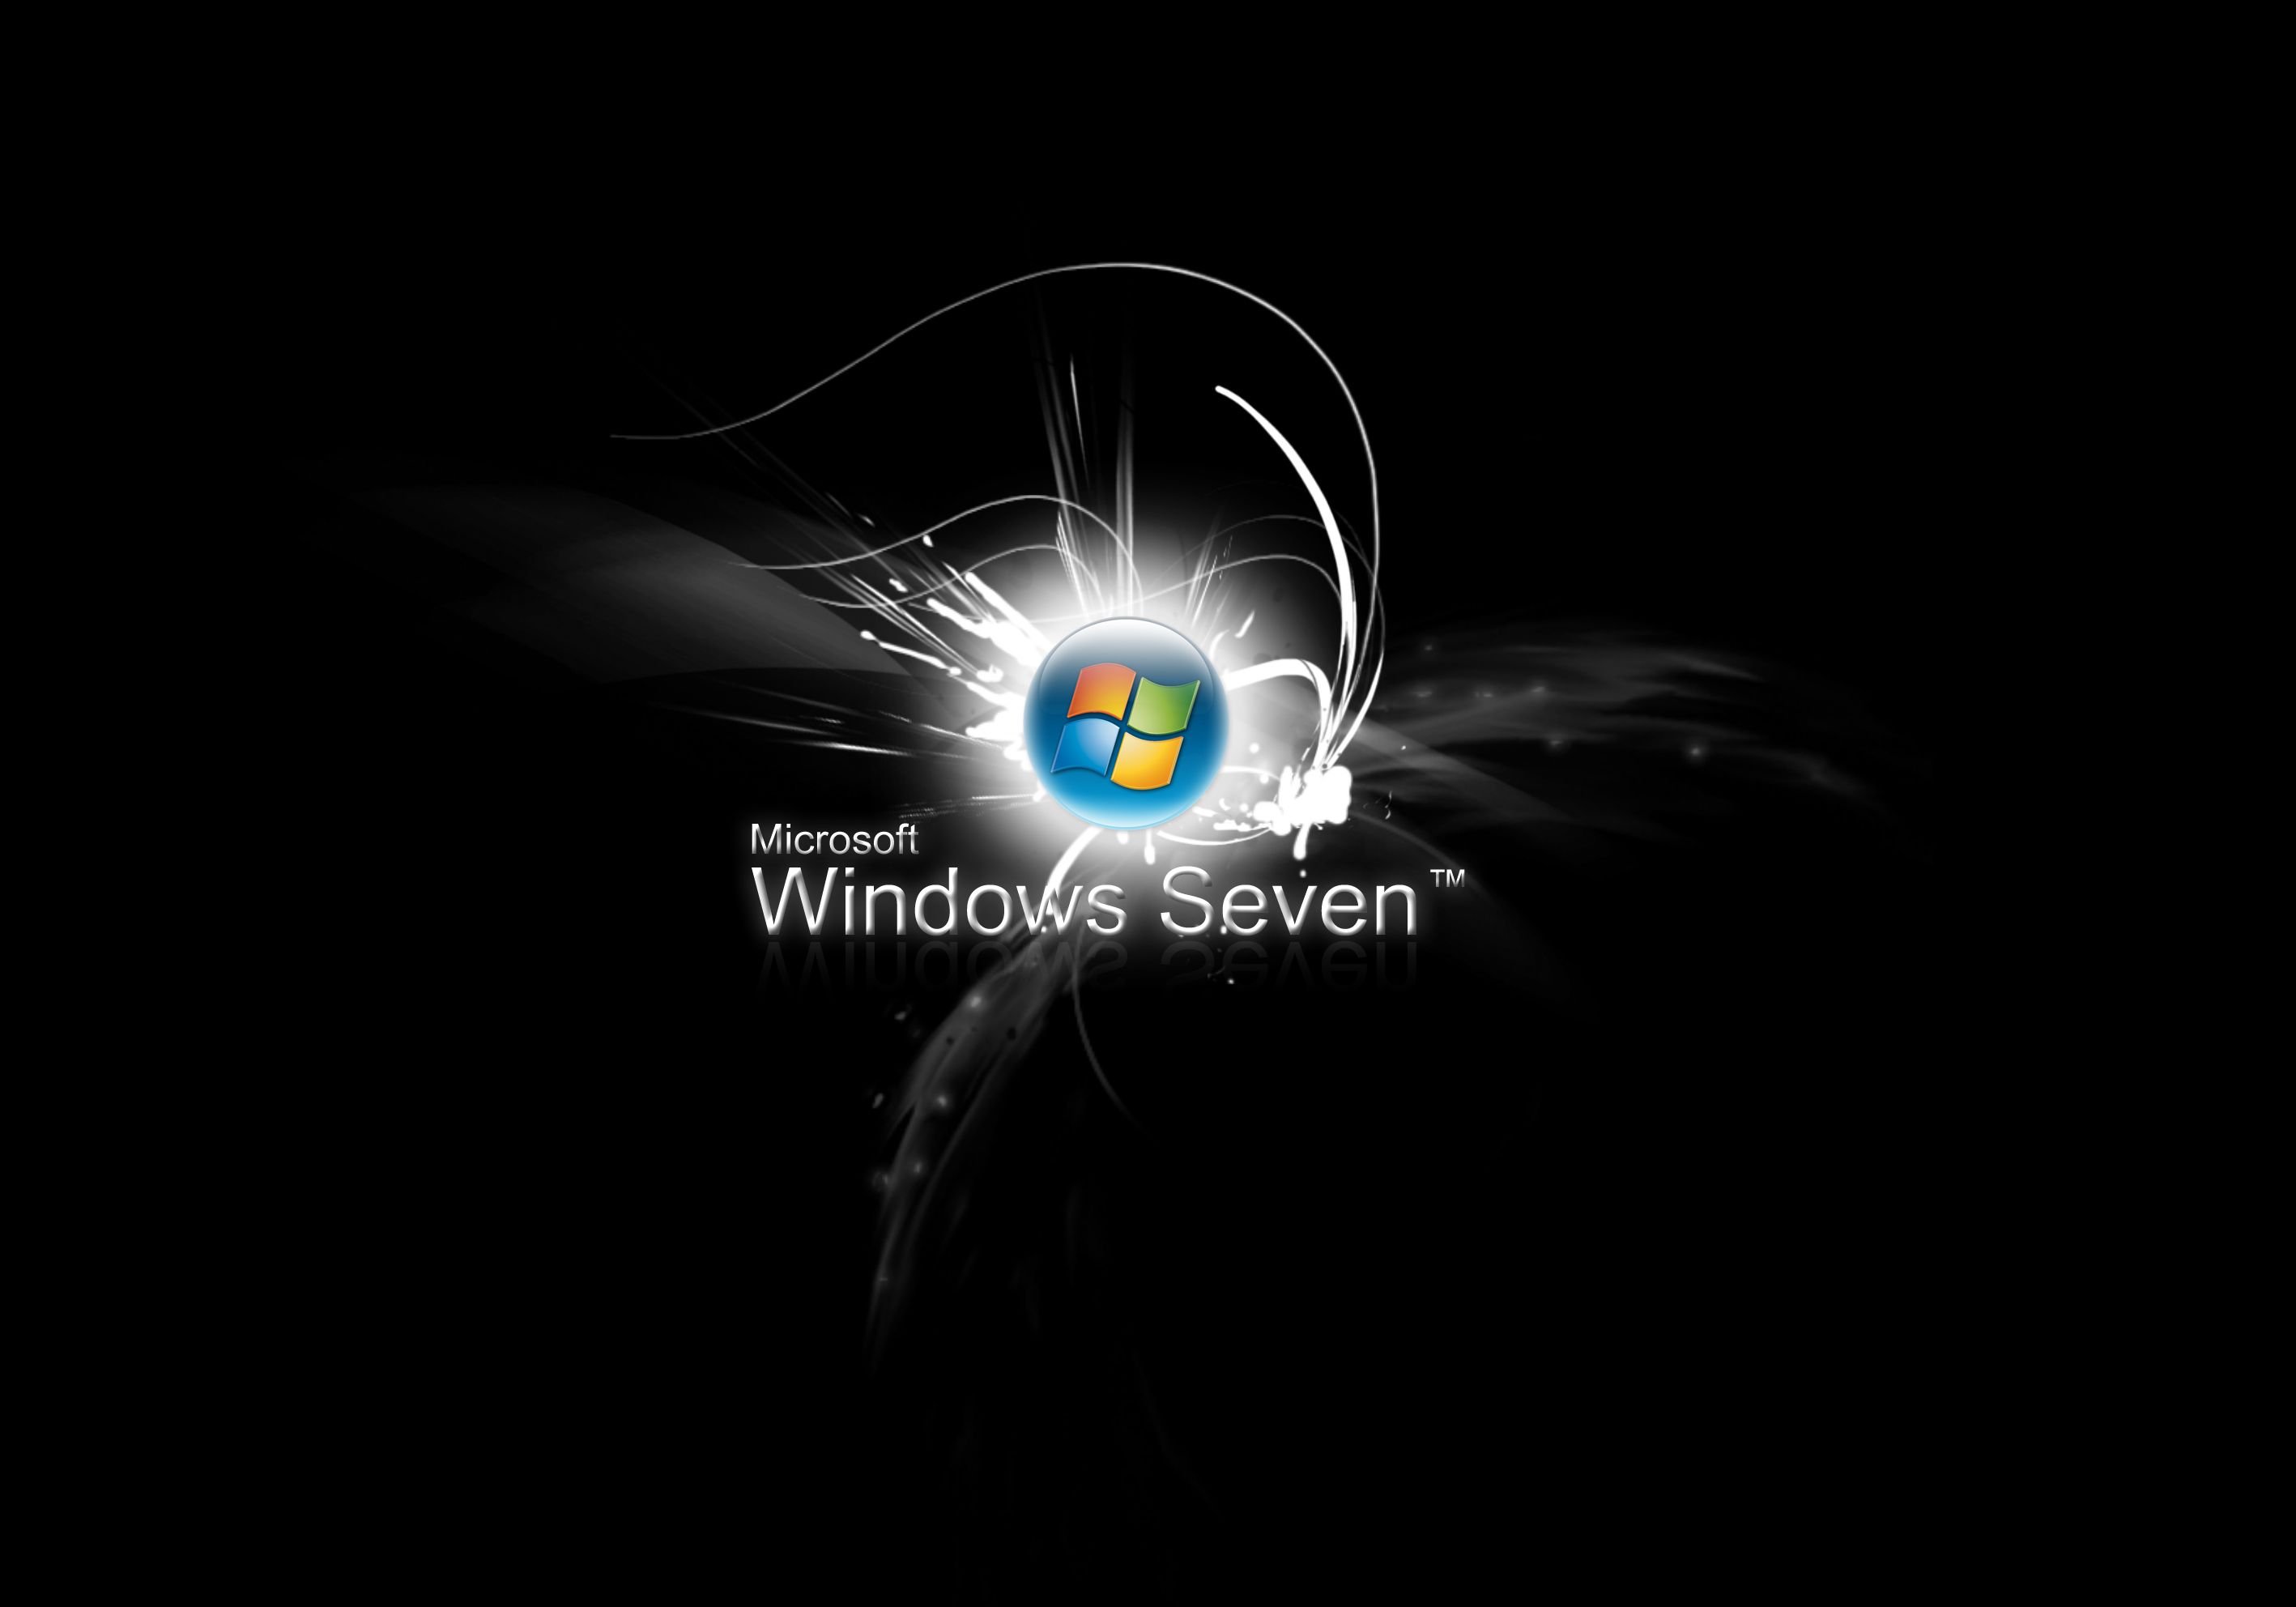 Cool Wallpapers For Windows 7 - Wallpaper Online